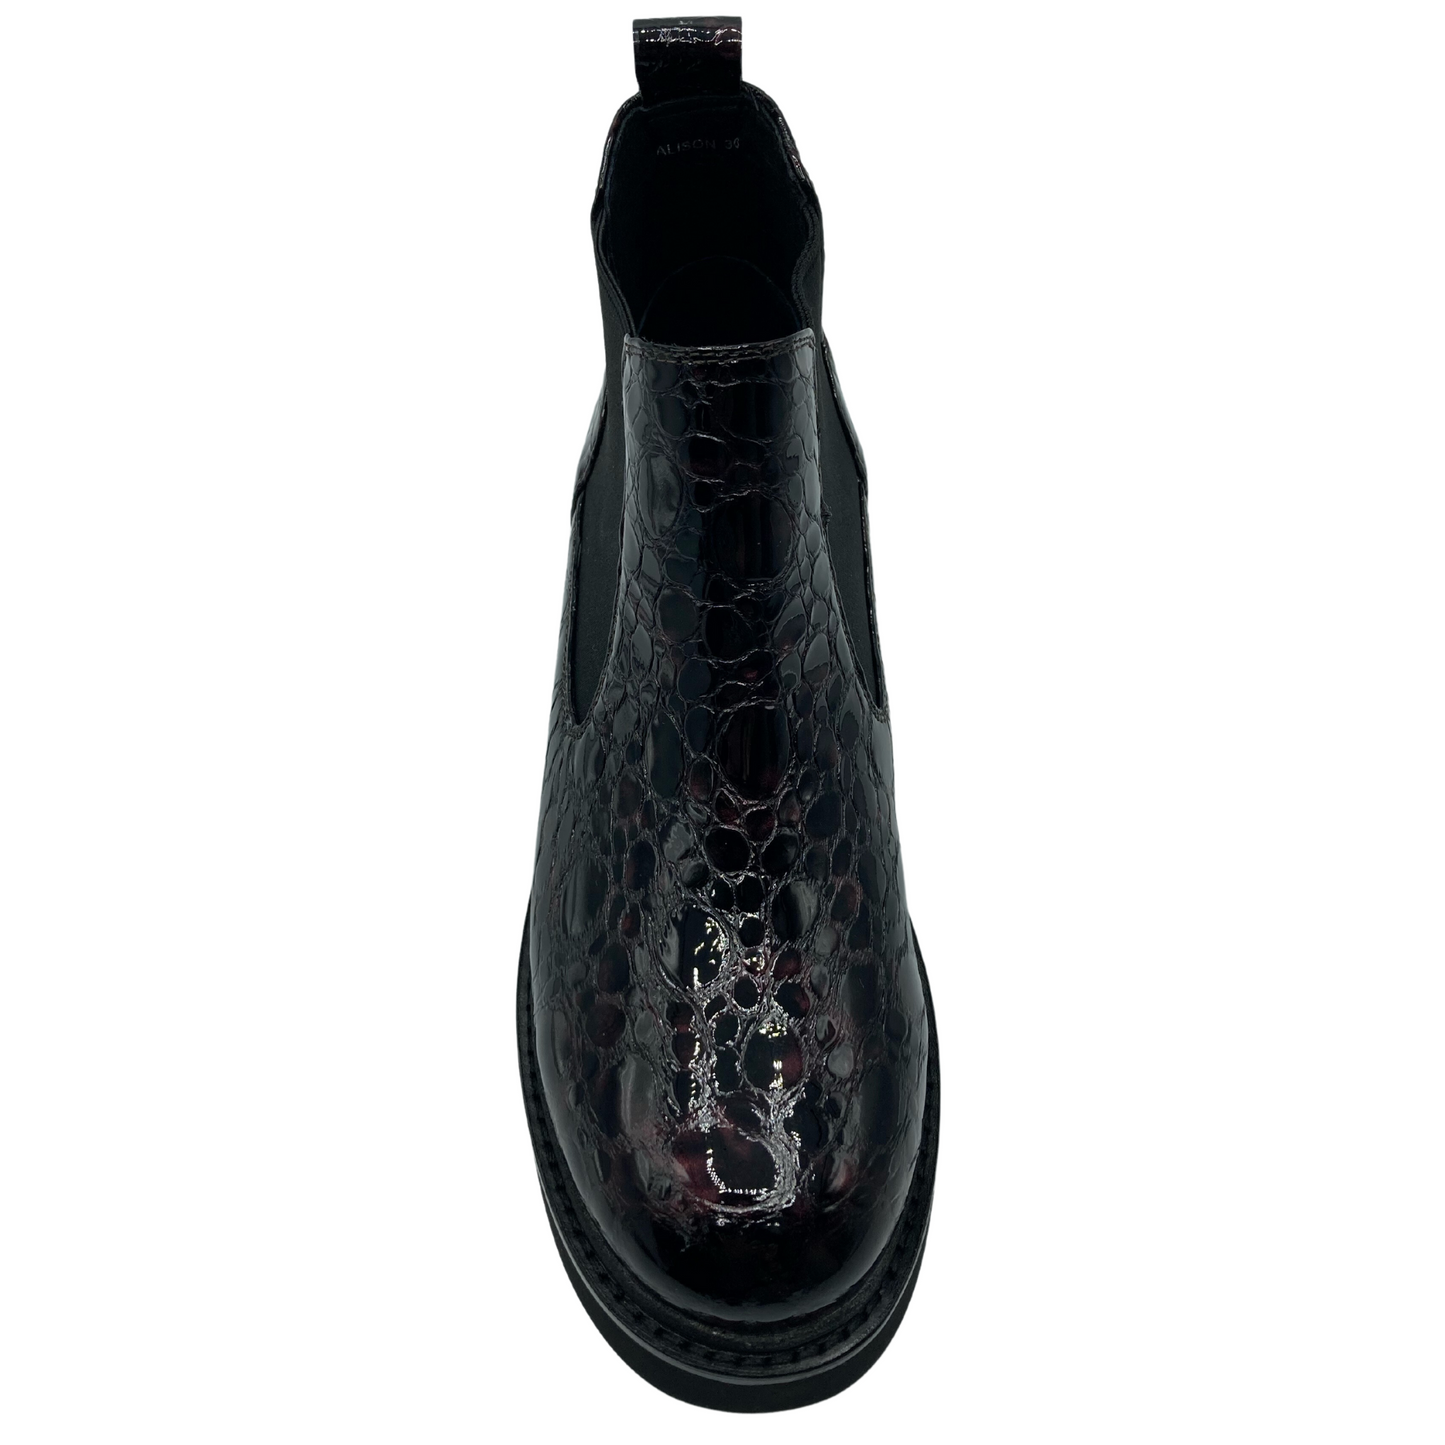 Top view of rounded toe leather boot with textured pattern and double elastic gore